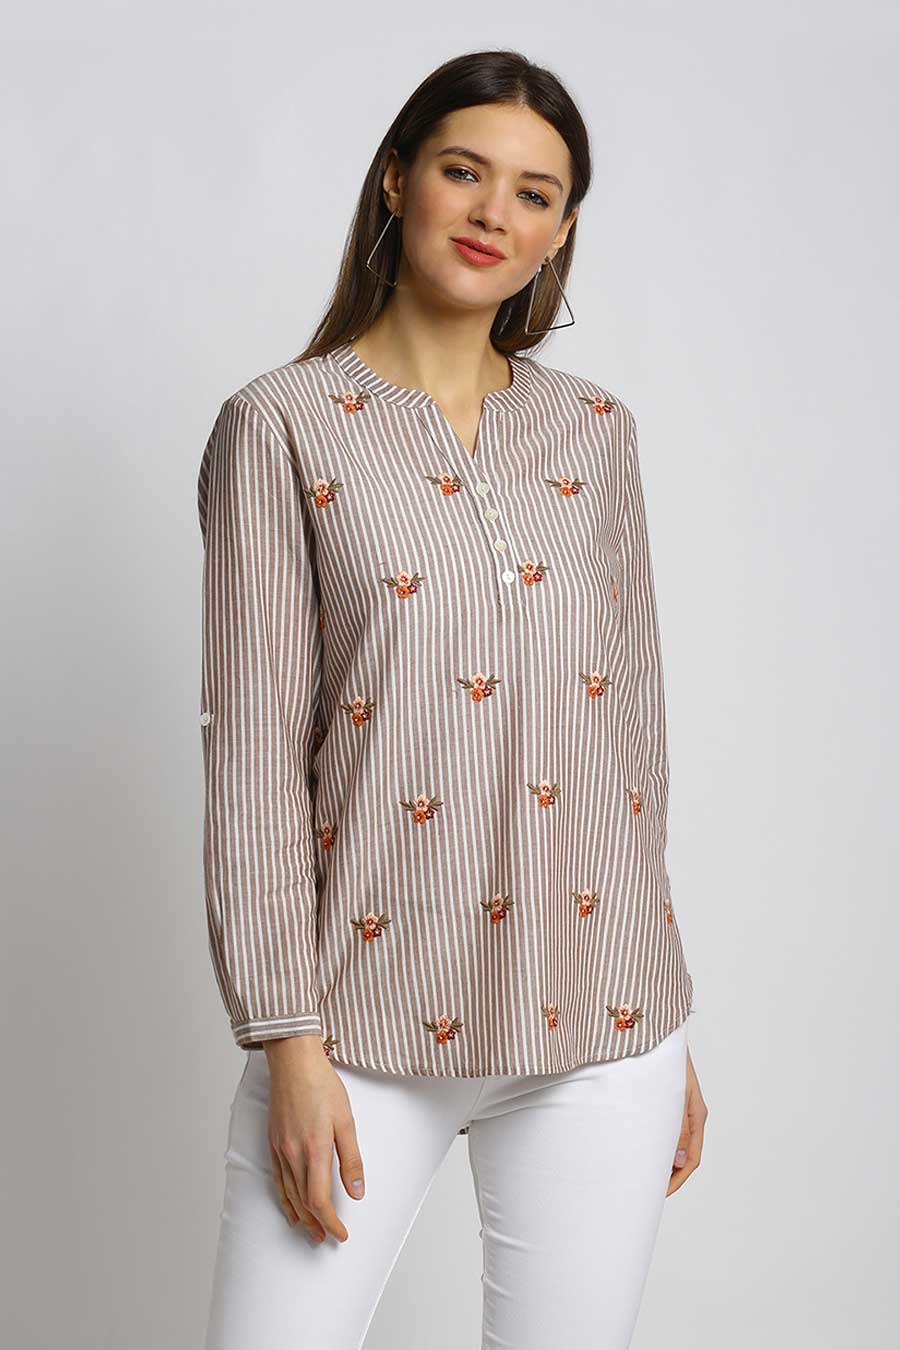 Floral Embroidered Brown Stripes Top